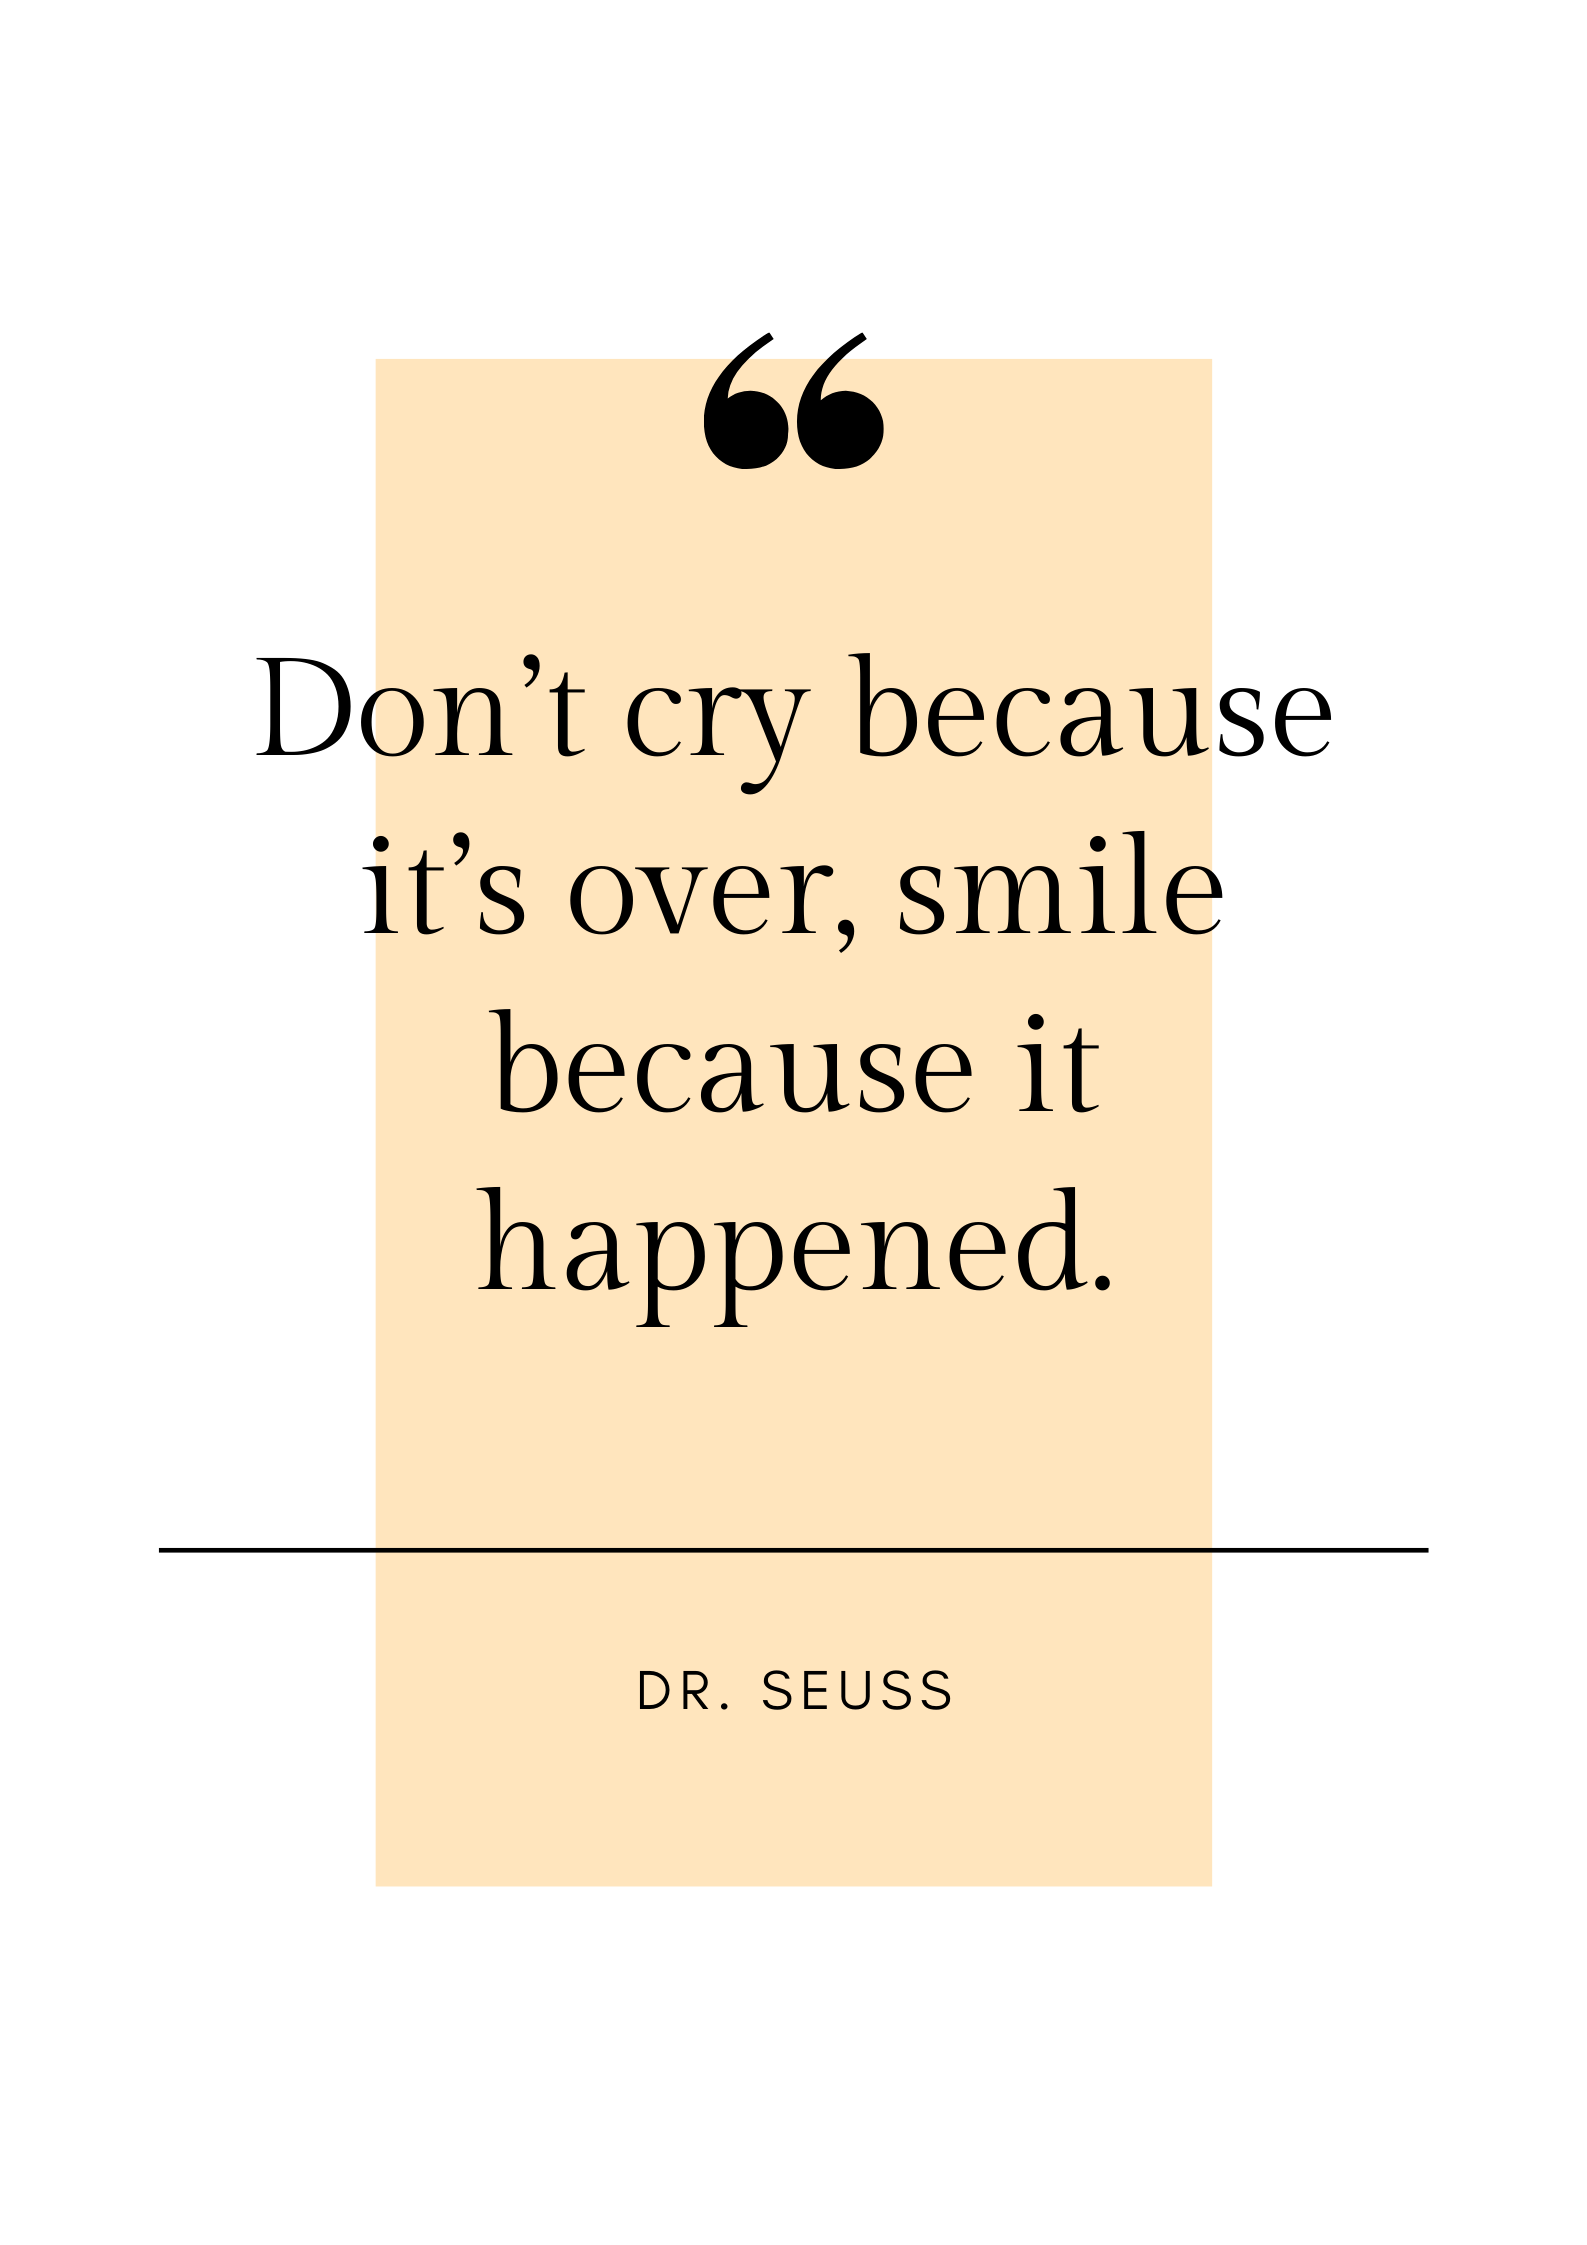 Don’t cry because it’s over, smile because it happened - Dr. Seuss